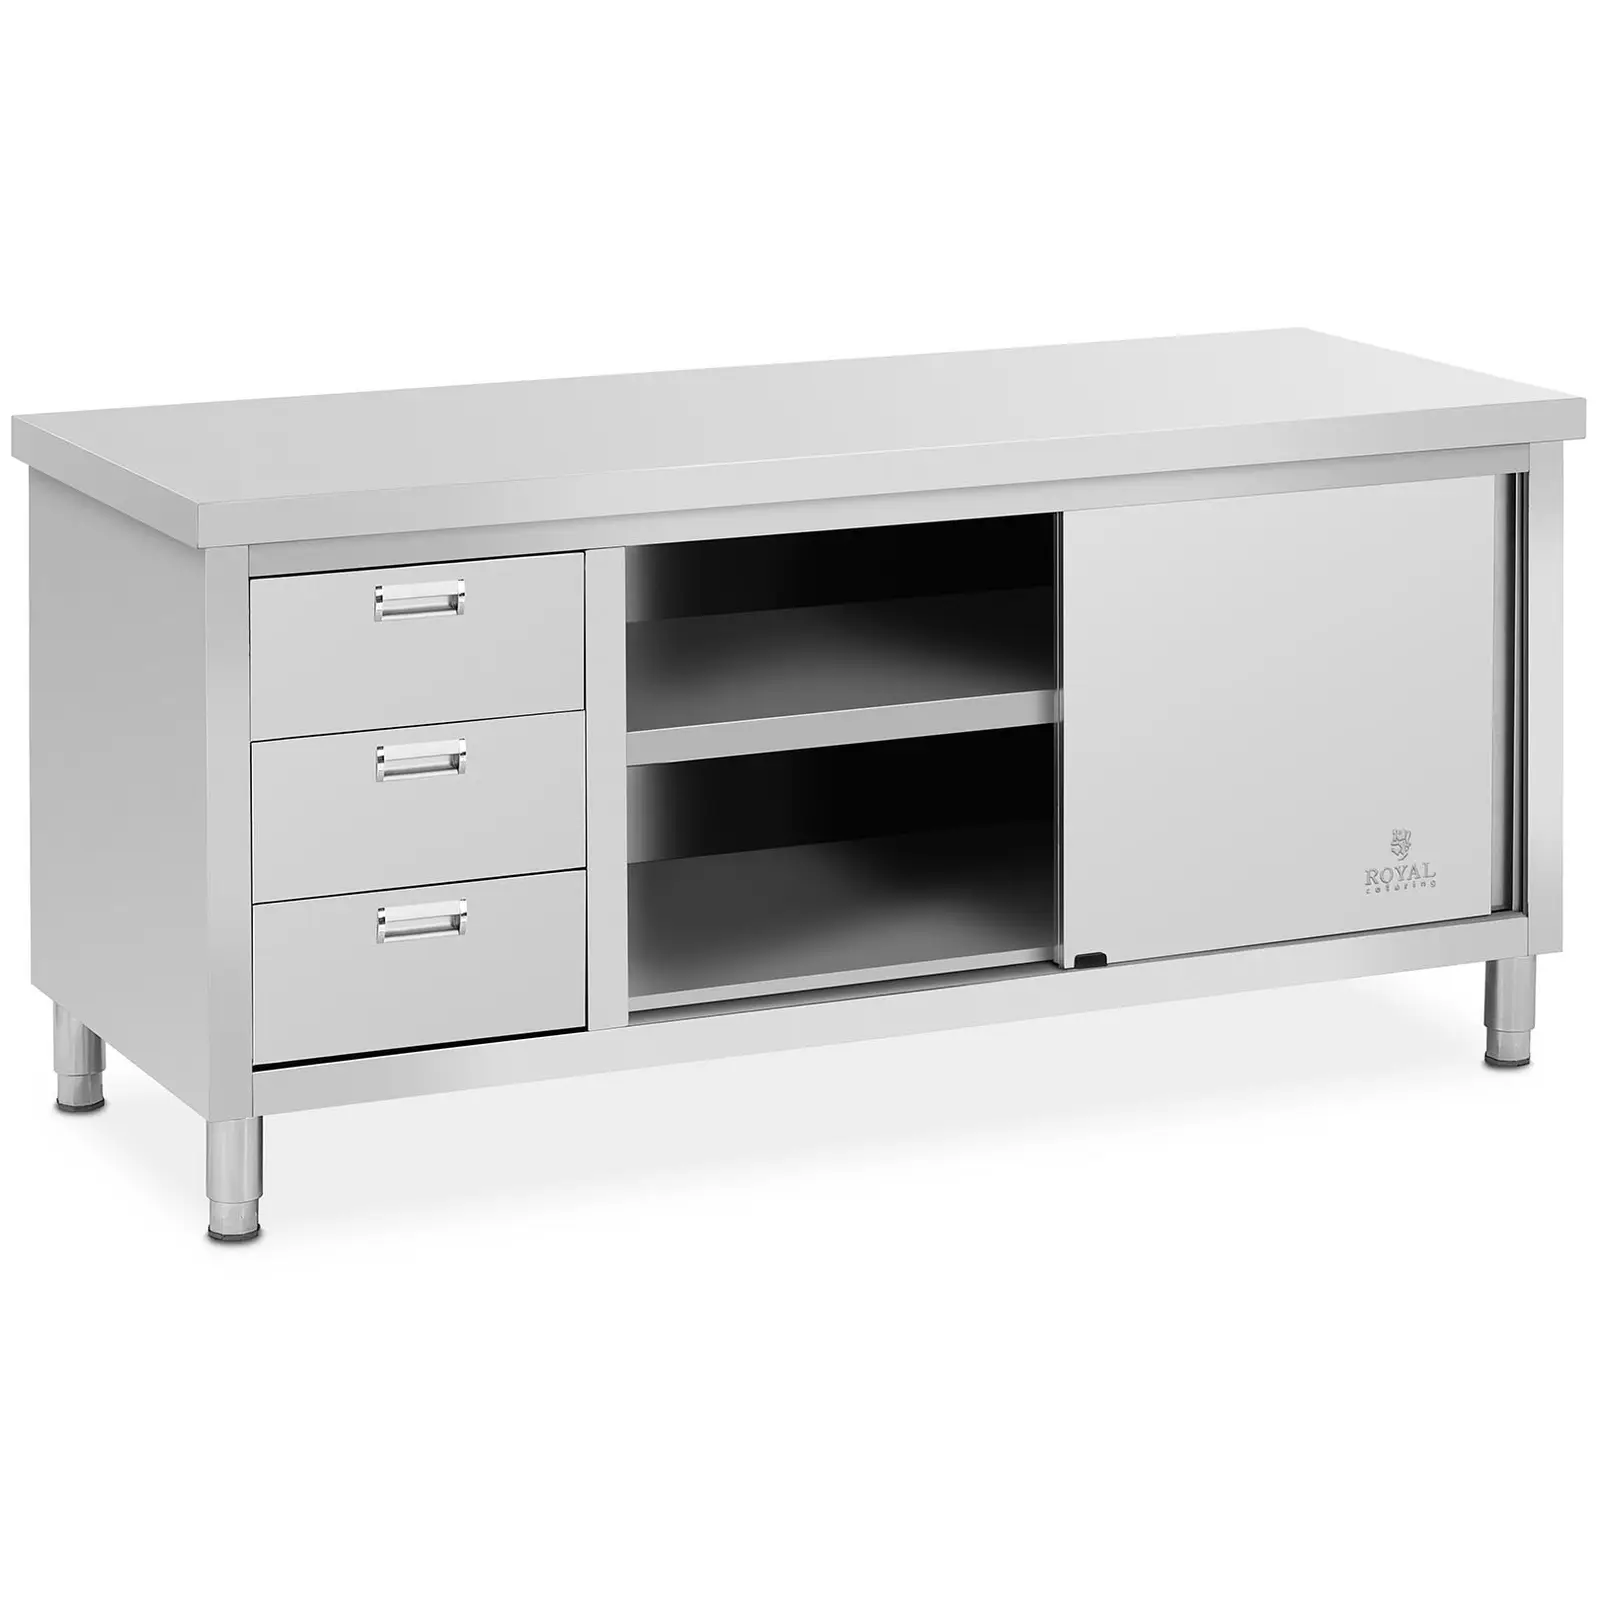 Work Cabinet - 180 x 70 x 85 cm - Royal Catering - 600 kg load capacity - 3 drawers